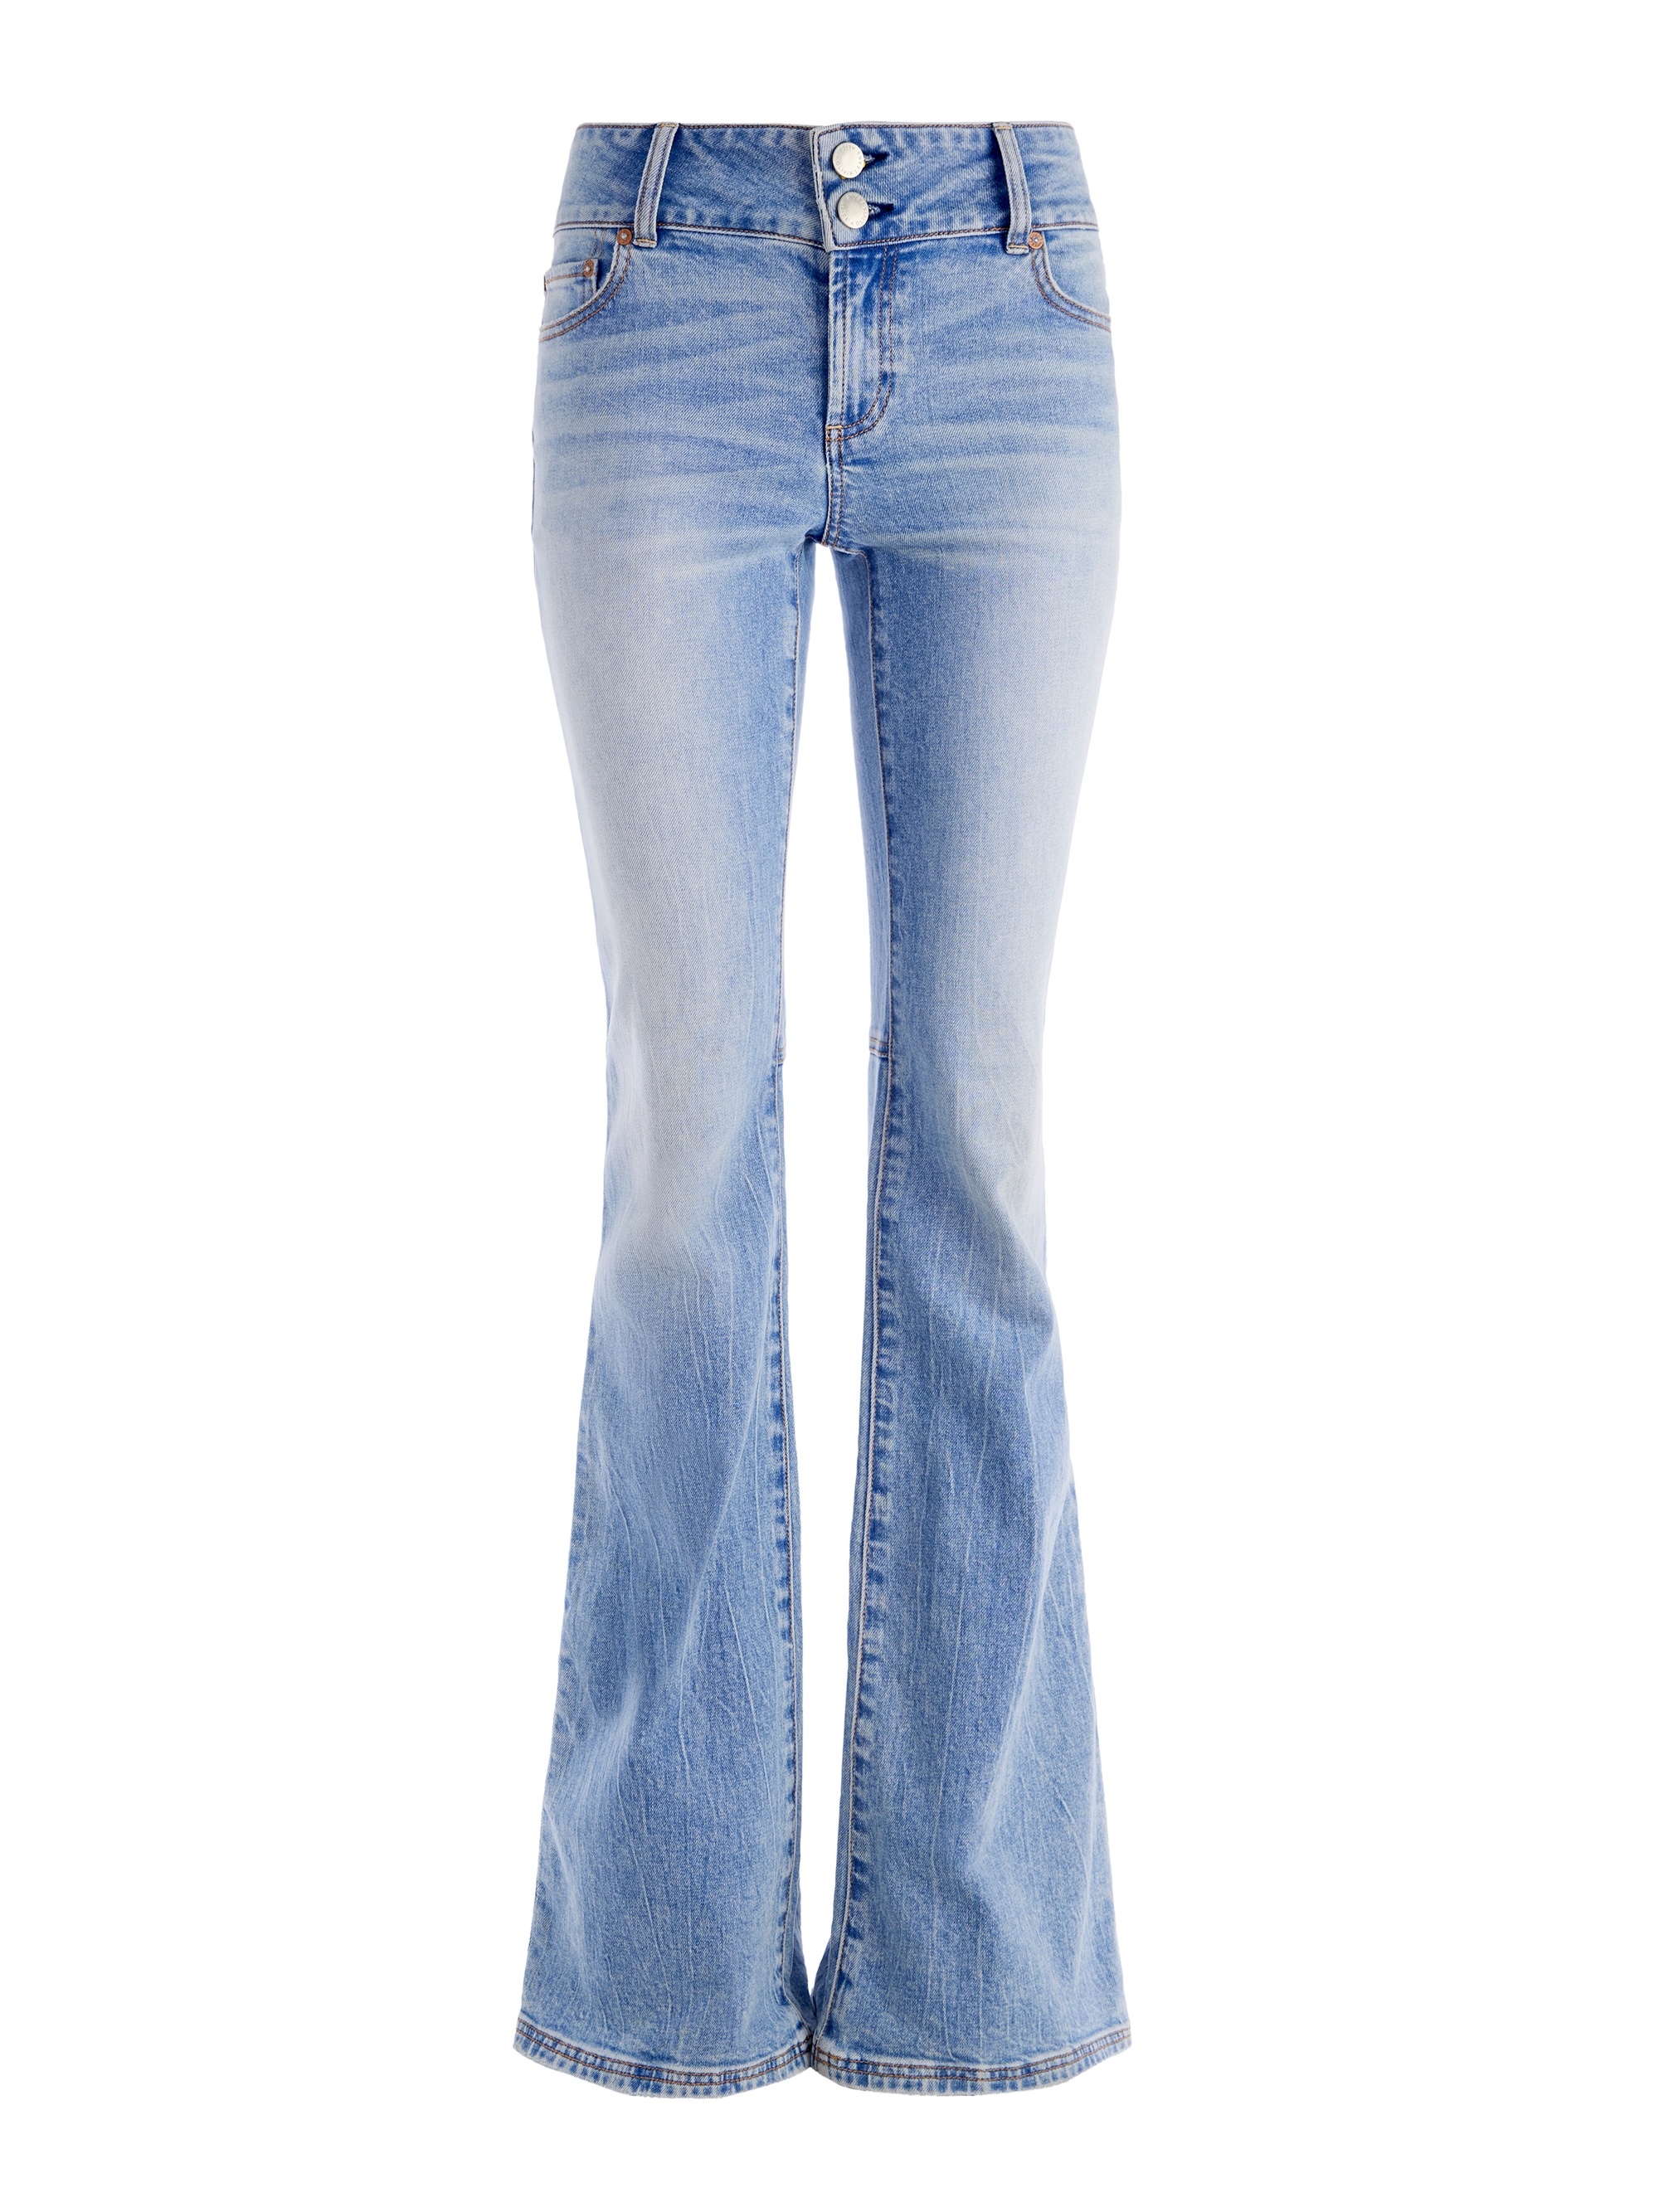 STACEY LOW RISE BELL BOTTOM JEAN - 1